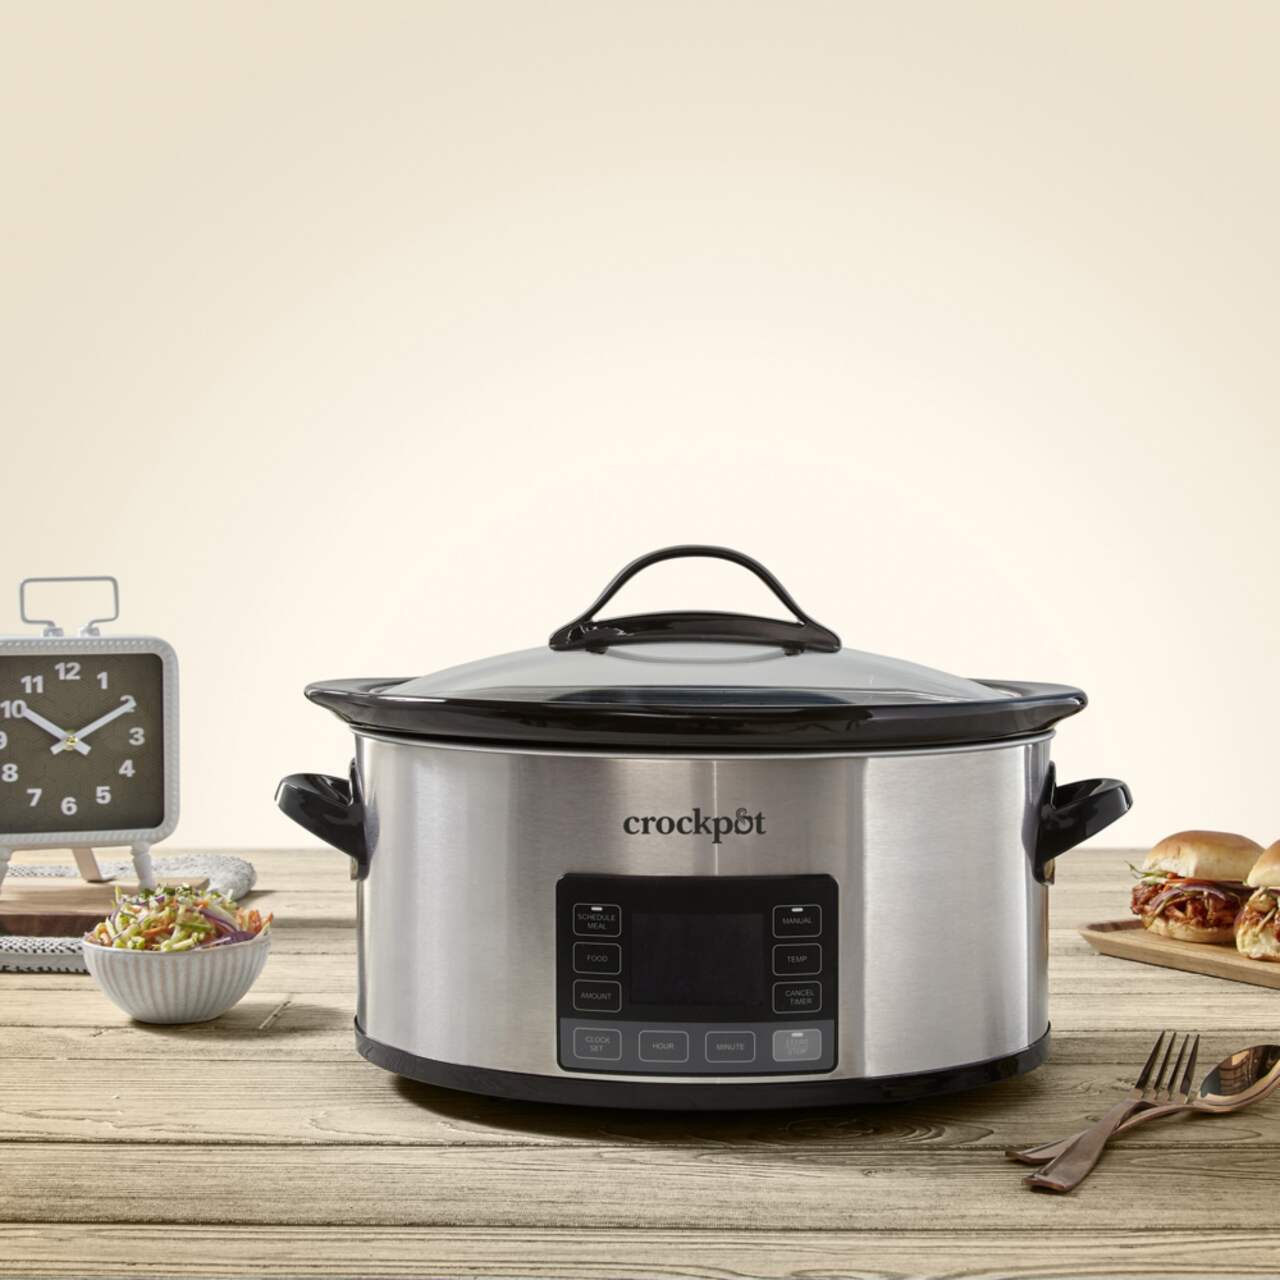 https://media-www.canadiantire.ca/product/living/kitchen/kitchen-appliances/0432796/crockpot-my-time-slow-cooker-6-qt-84c9884a-cf89-4ddb-9e06-d2a15fd1ddc9.png?imdensity=1&imwidth=1244&impolicy=mZoom